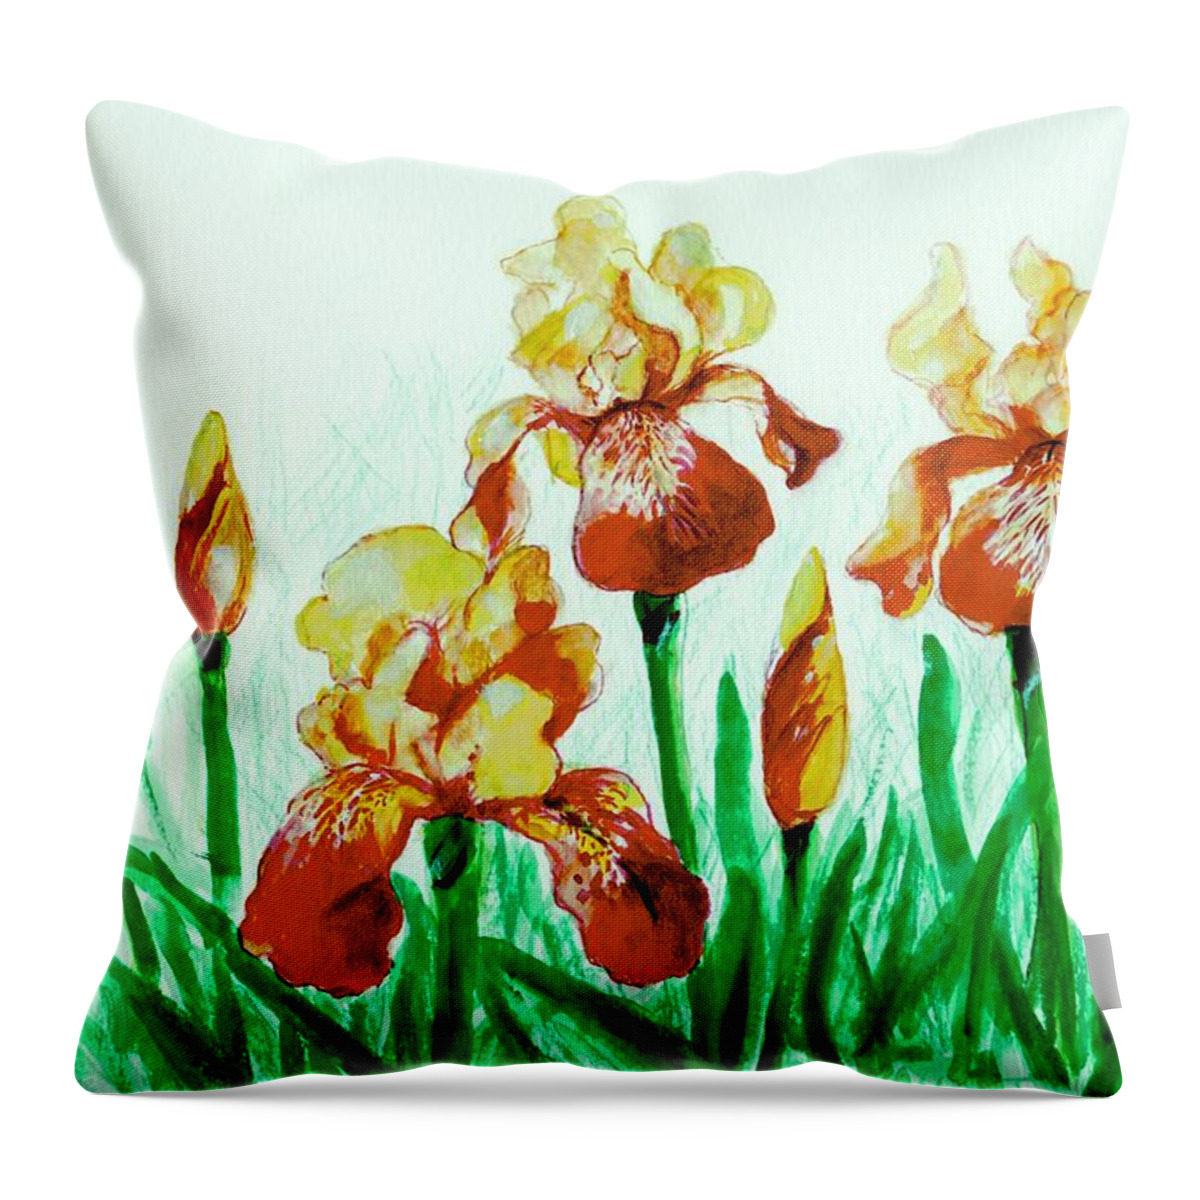 Flowers Throw Pillow featuring the painting Yellow Irises by Mary Armstrong